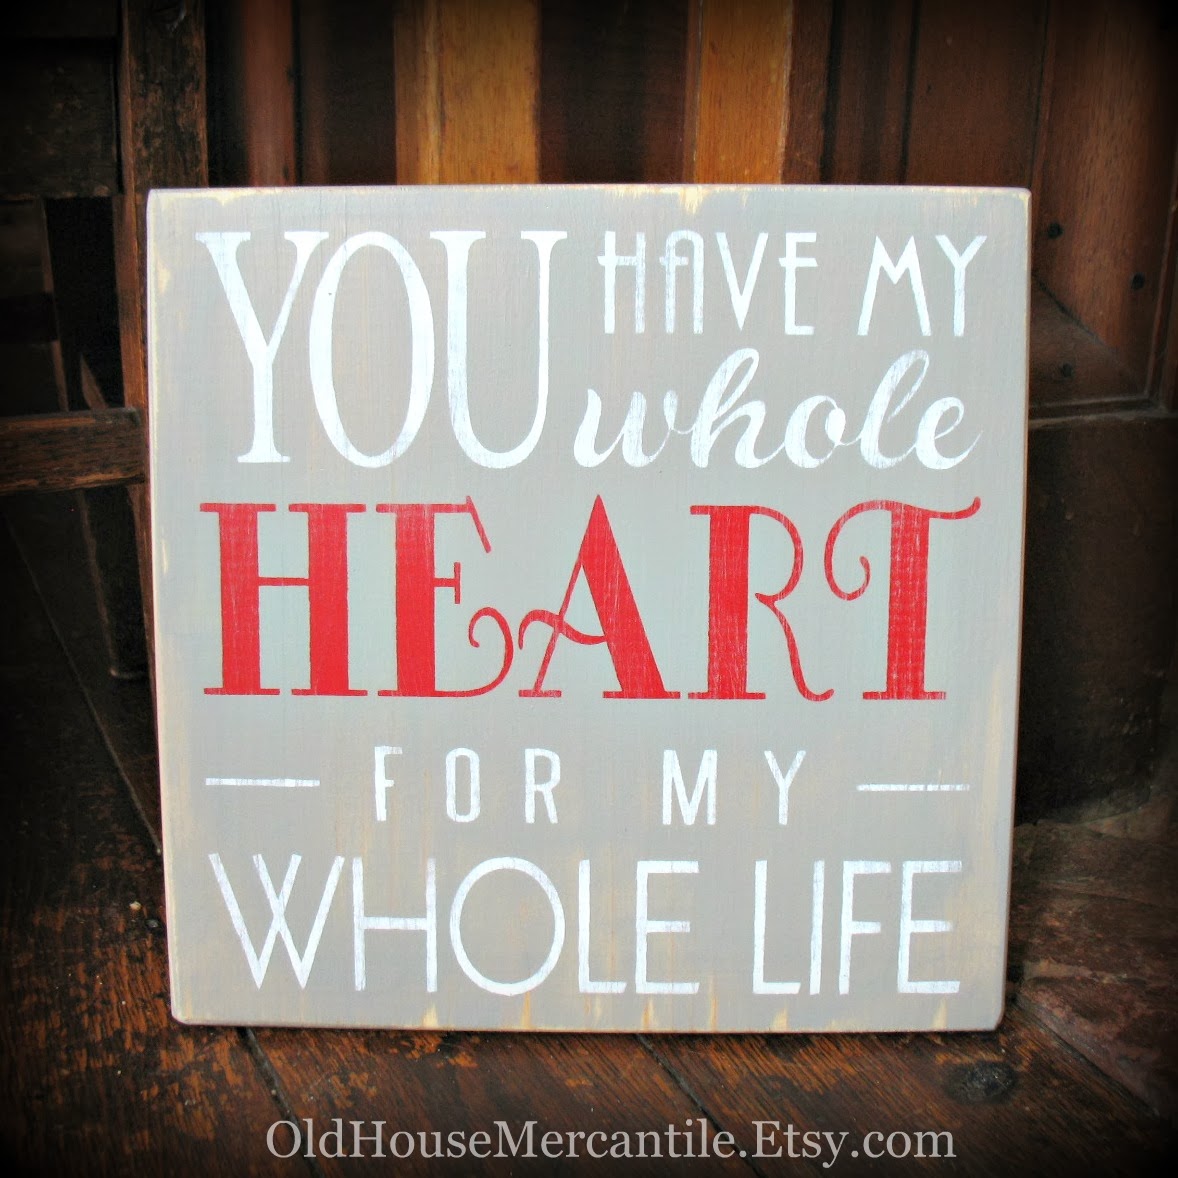 https://www.etsy.com/listing/176305518/you-have-my-whole-heart-for-my-whole?